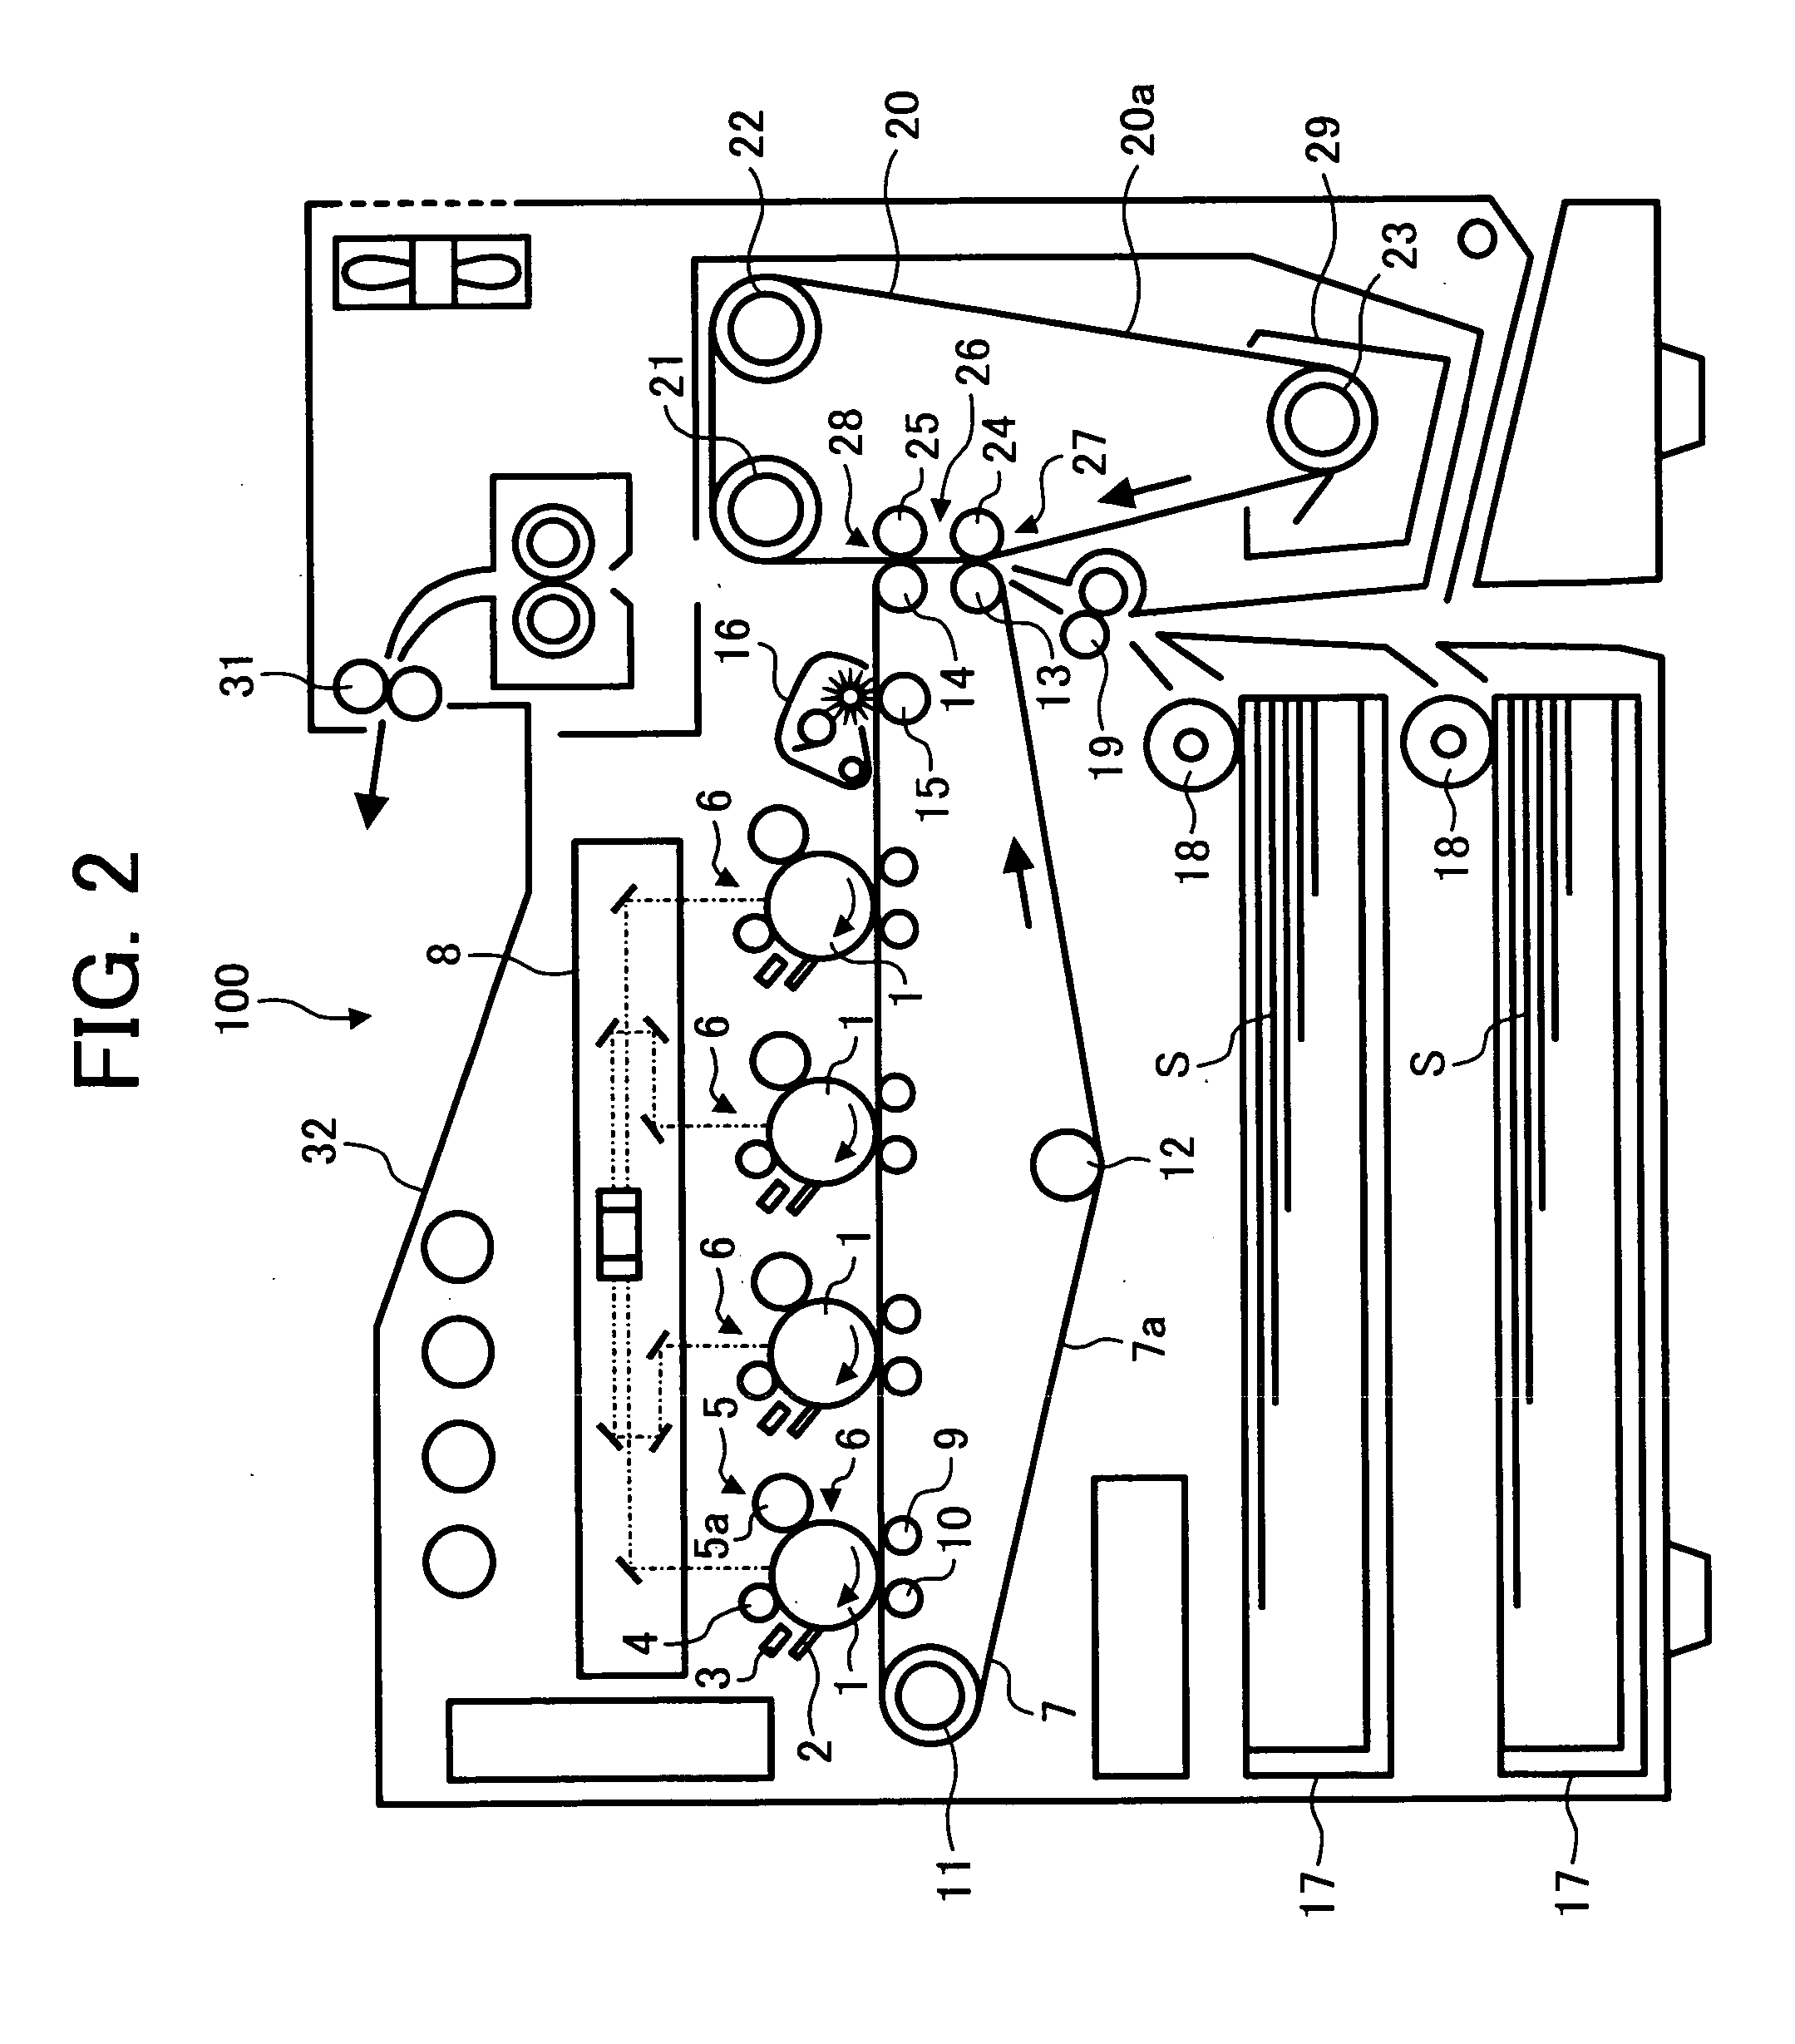 Image forming apparatus for recording on two sides in a single pass